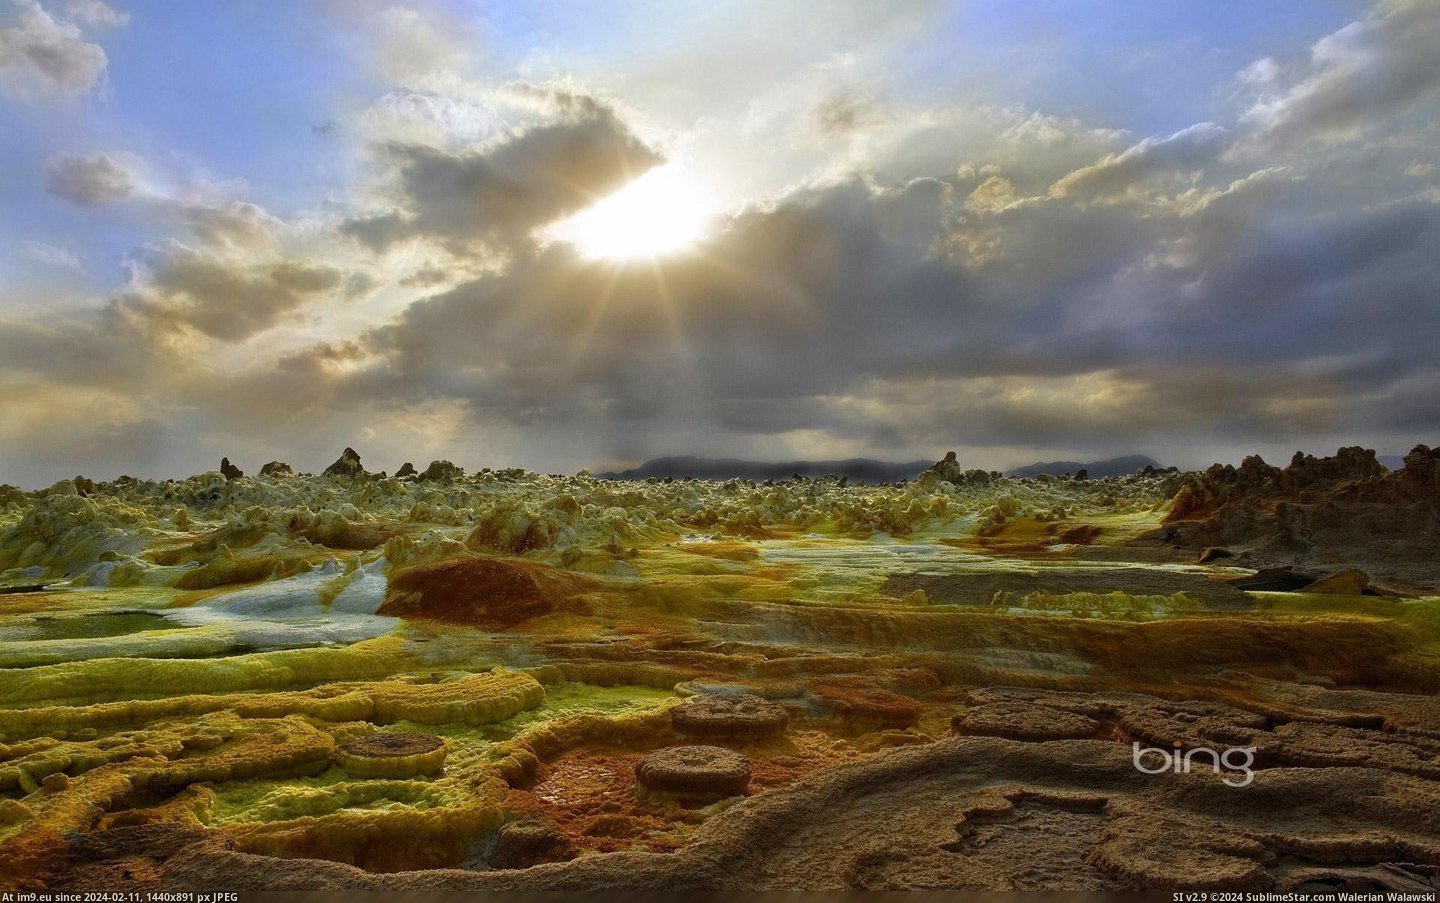 Dallol, Ethiopia (©Superstock) (in December 2012 HD Wallpapers)